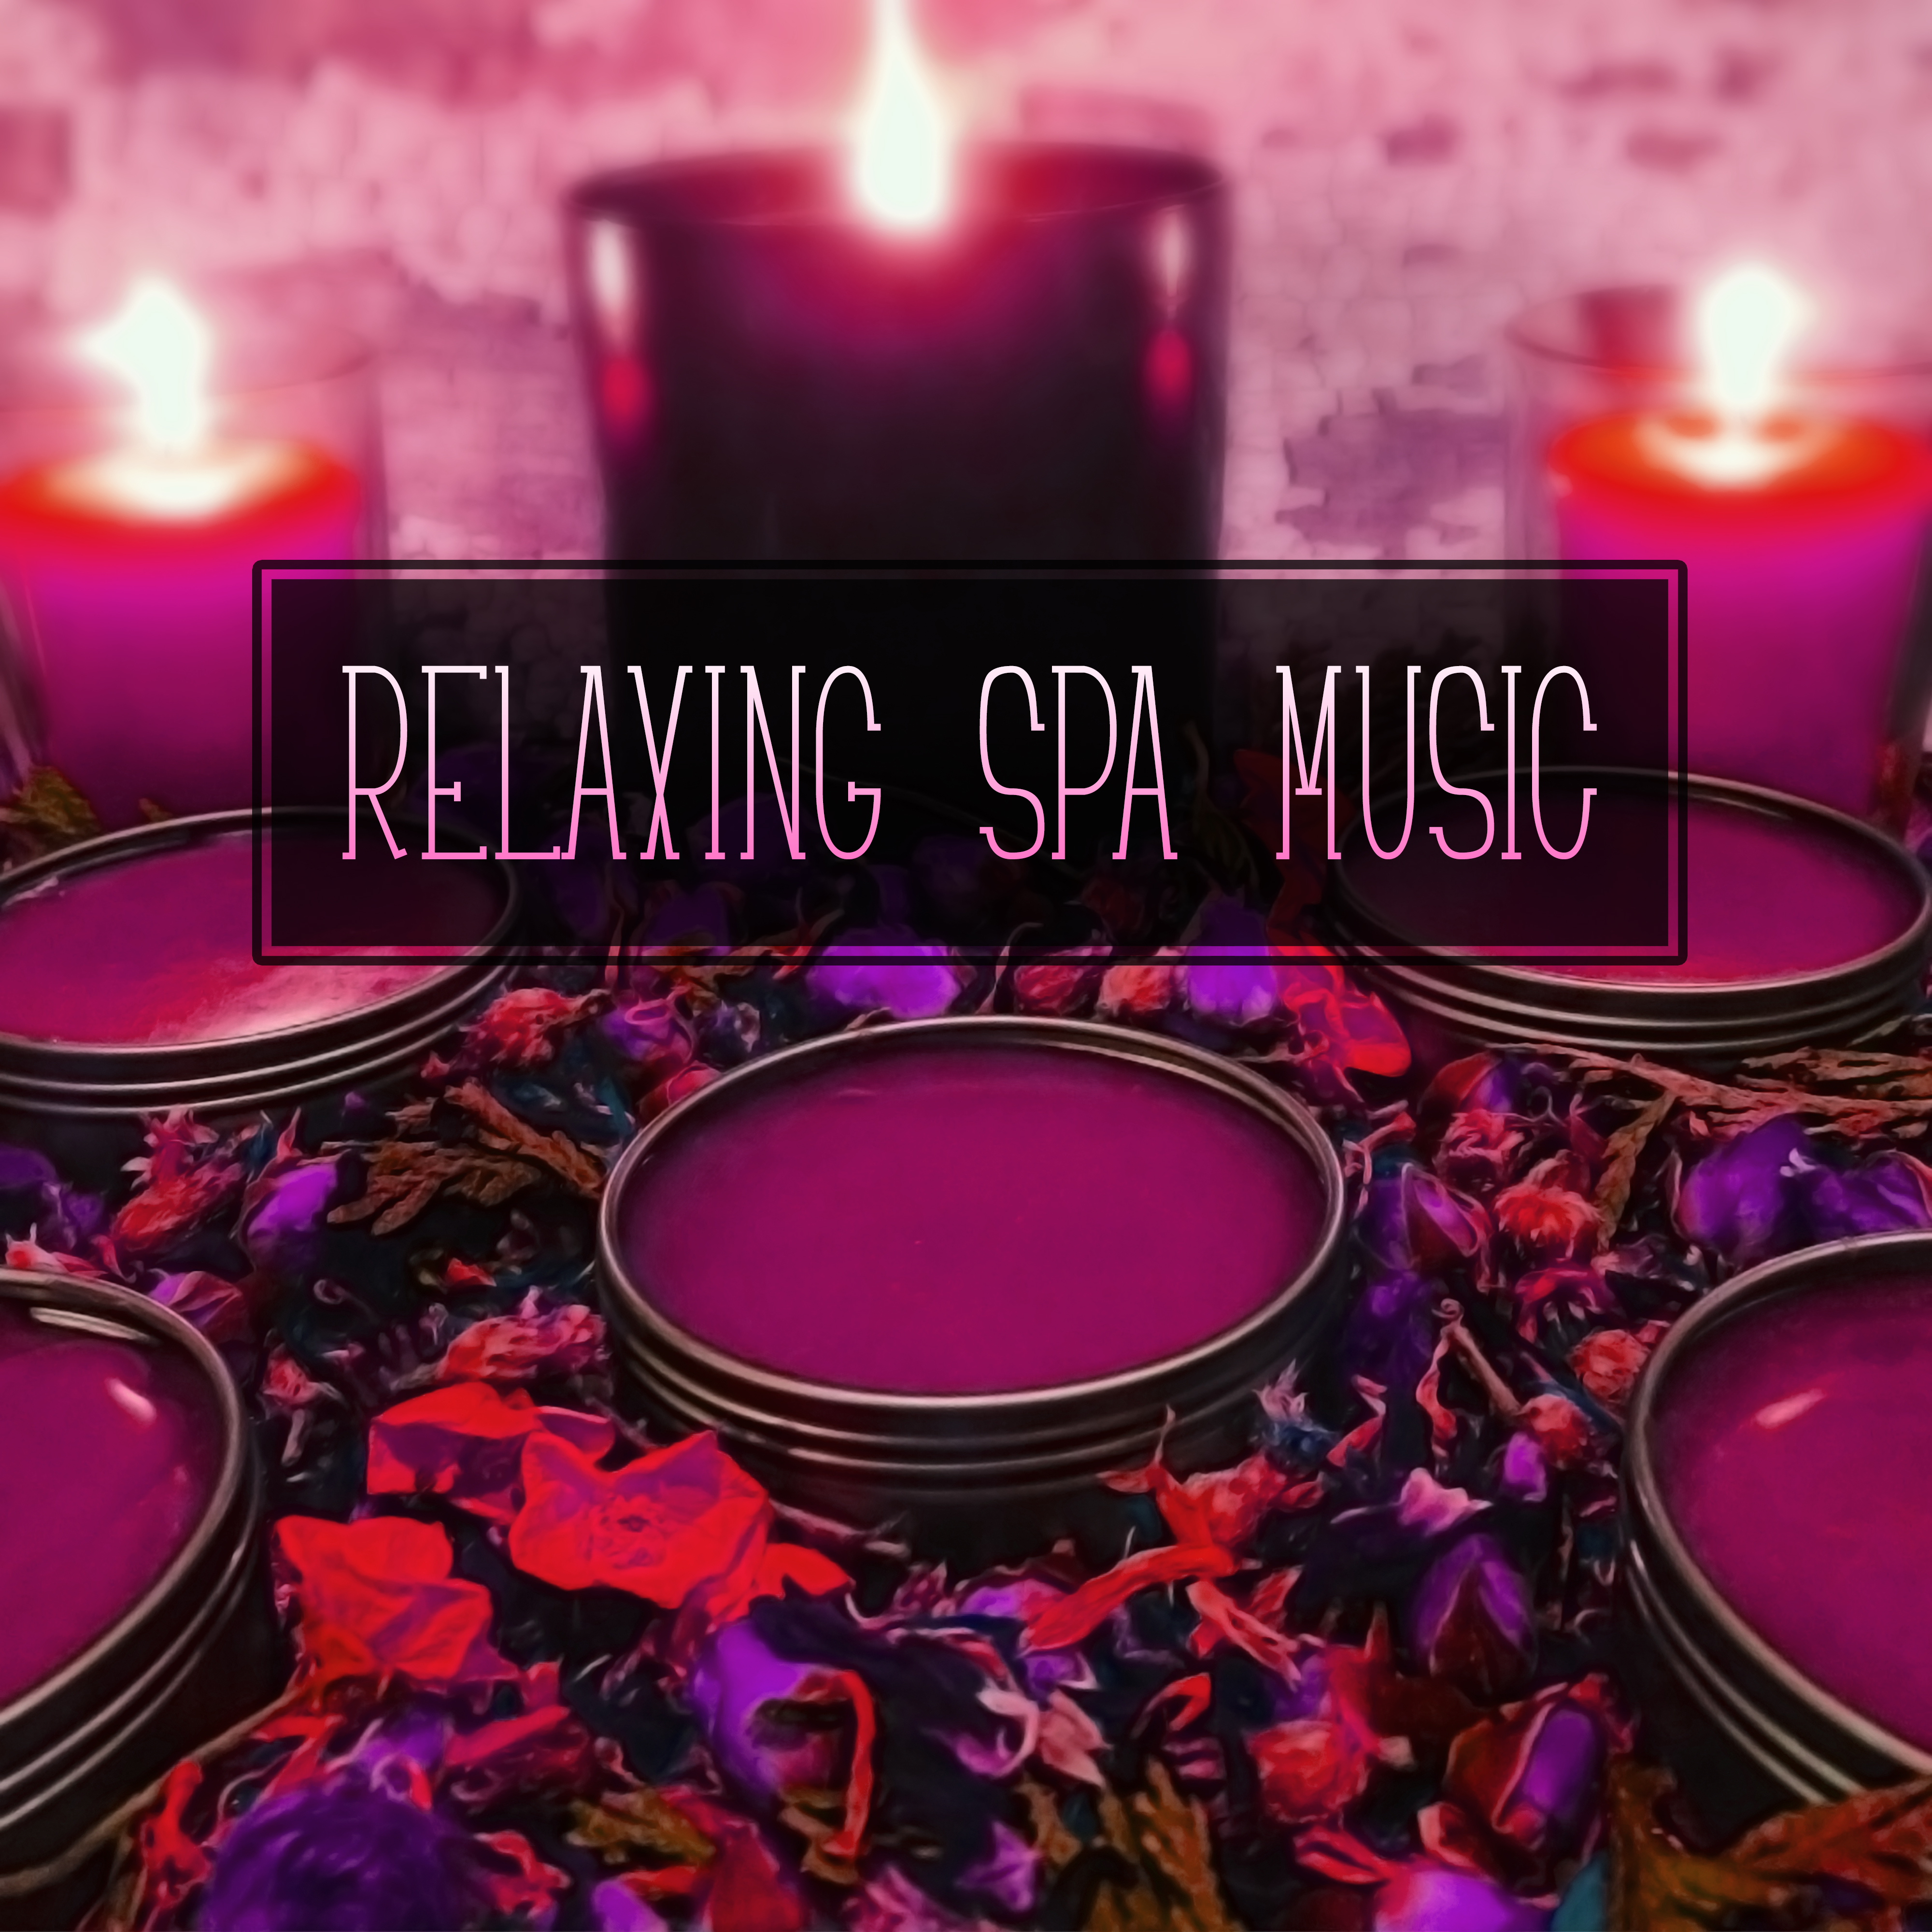 Relaxing Spa Music – Relax with New Age Music, Best for Massage Background, Beauty Treatments, Zen